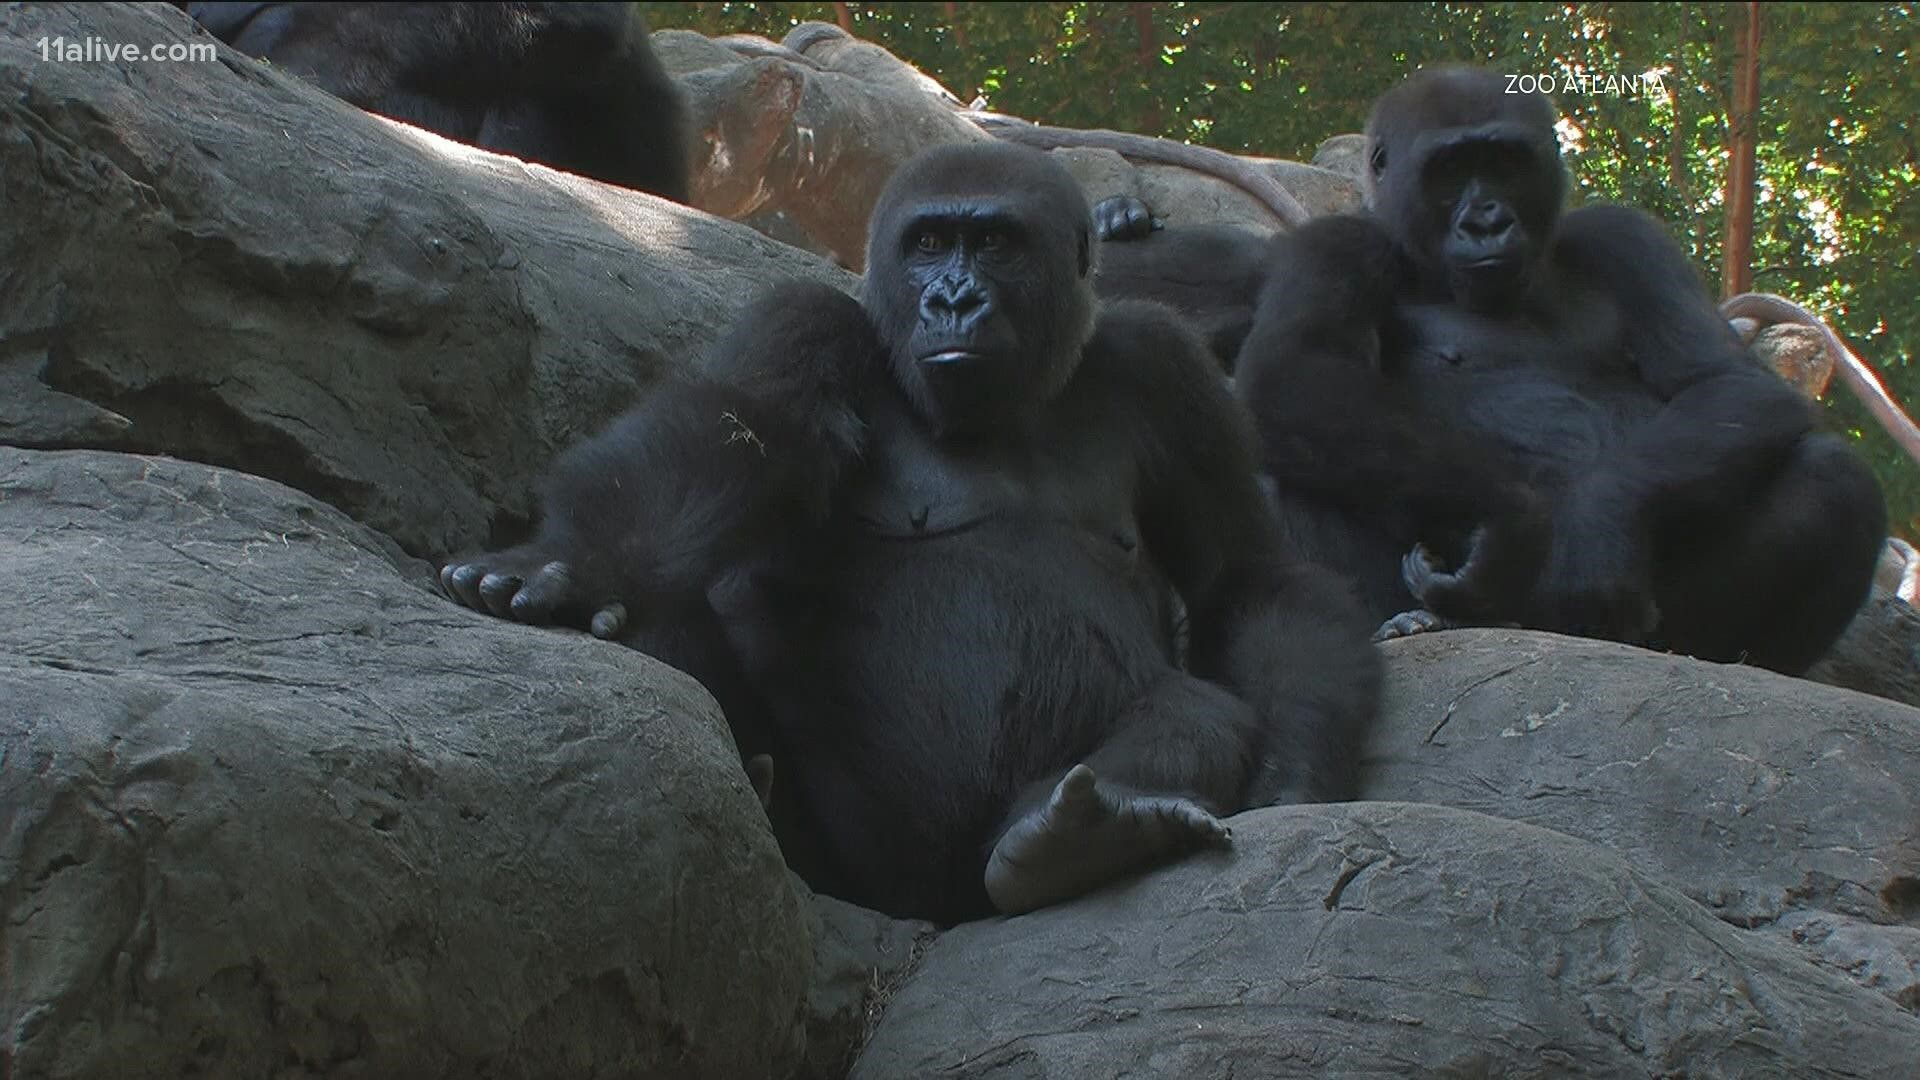 The zoo says it is using monoclonal antibodies to treat the gorillas at risk of developing complications from the virus.